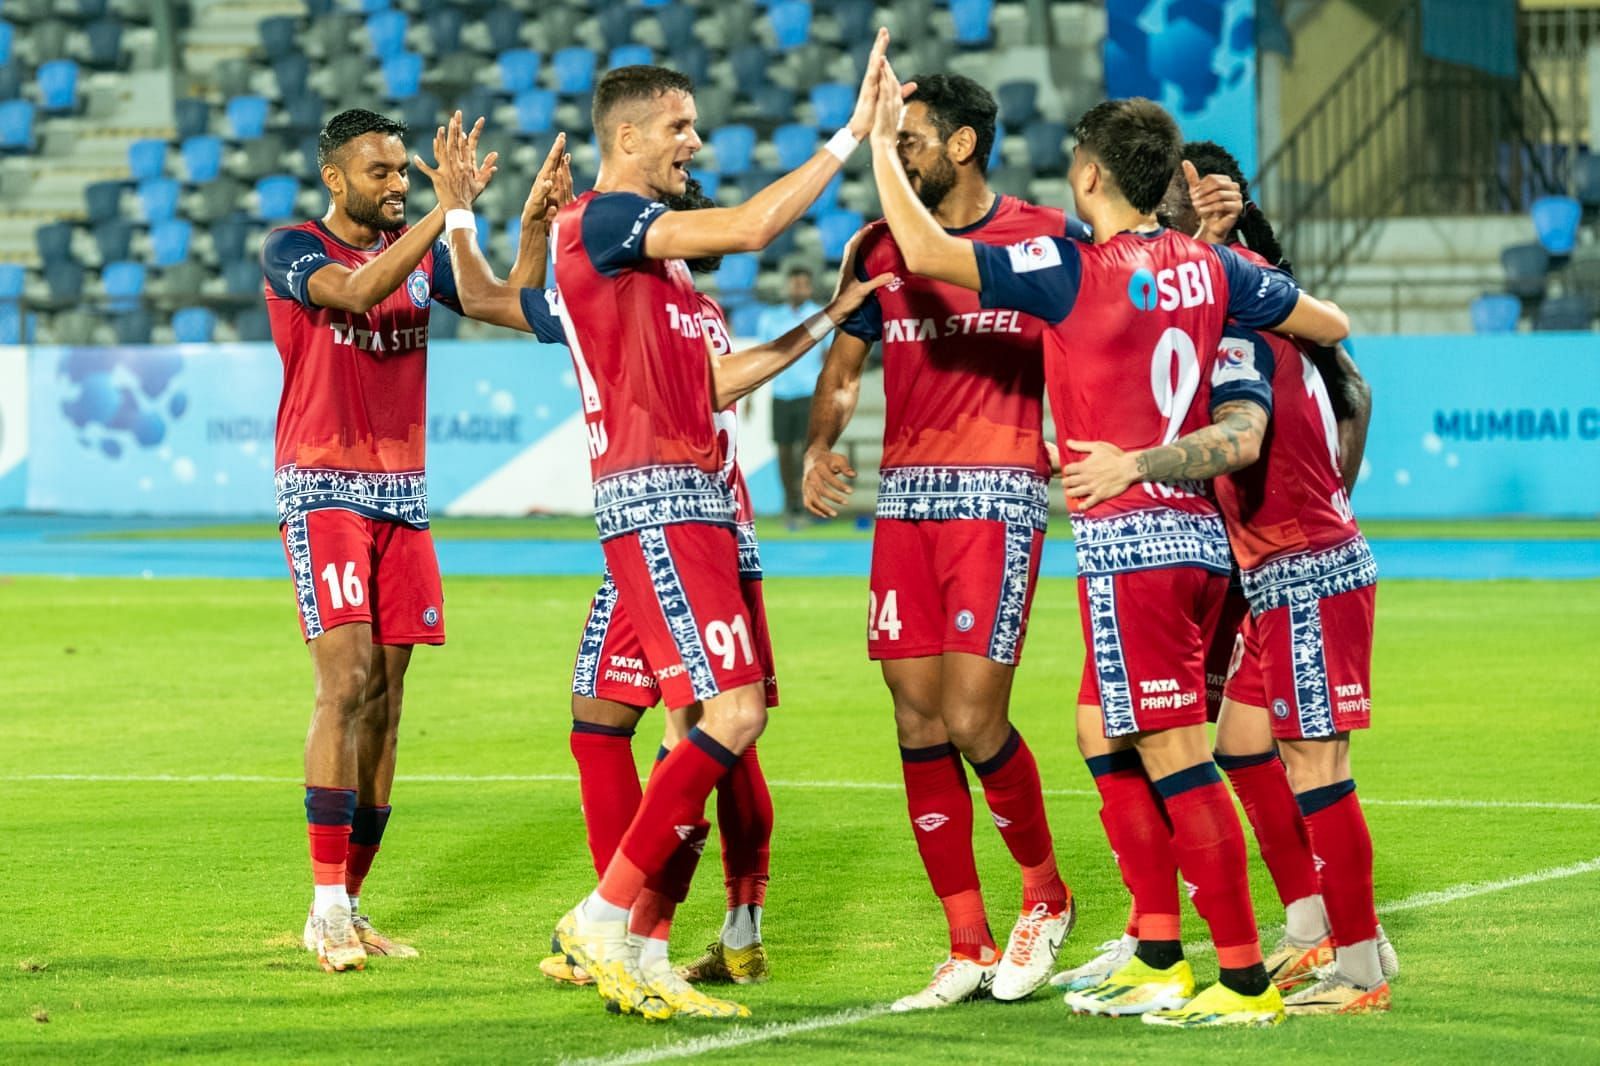 Jamshedpur FC players celebrating their victory.